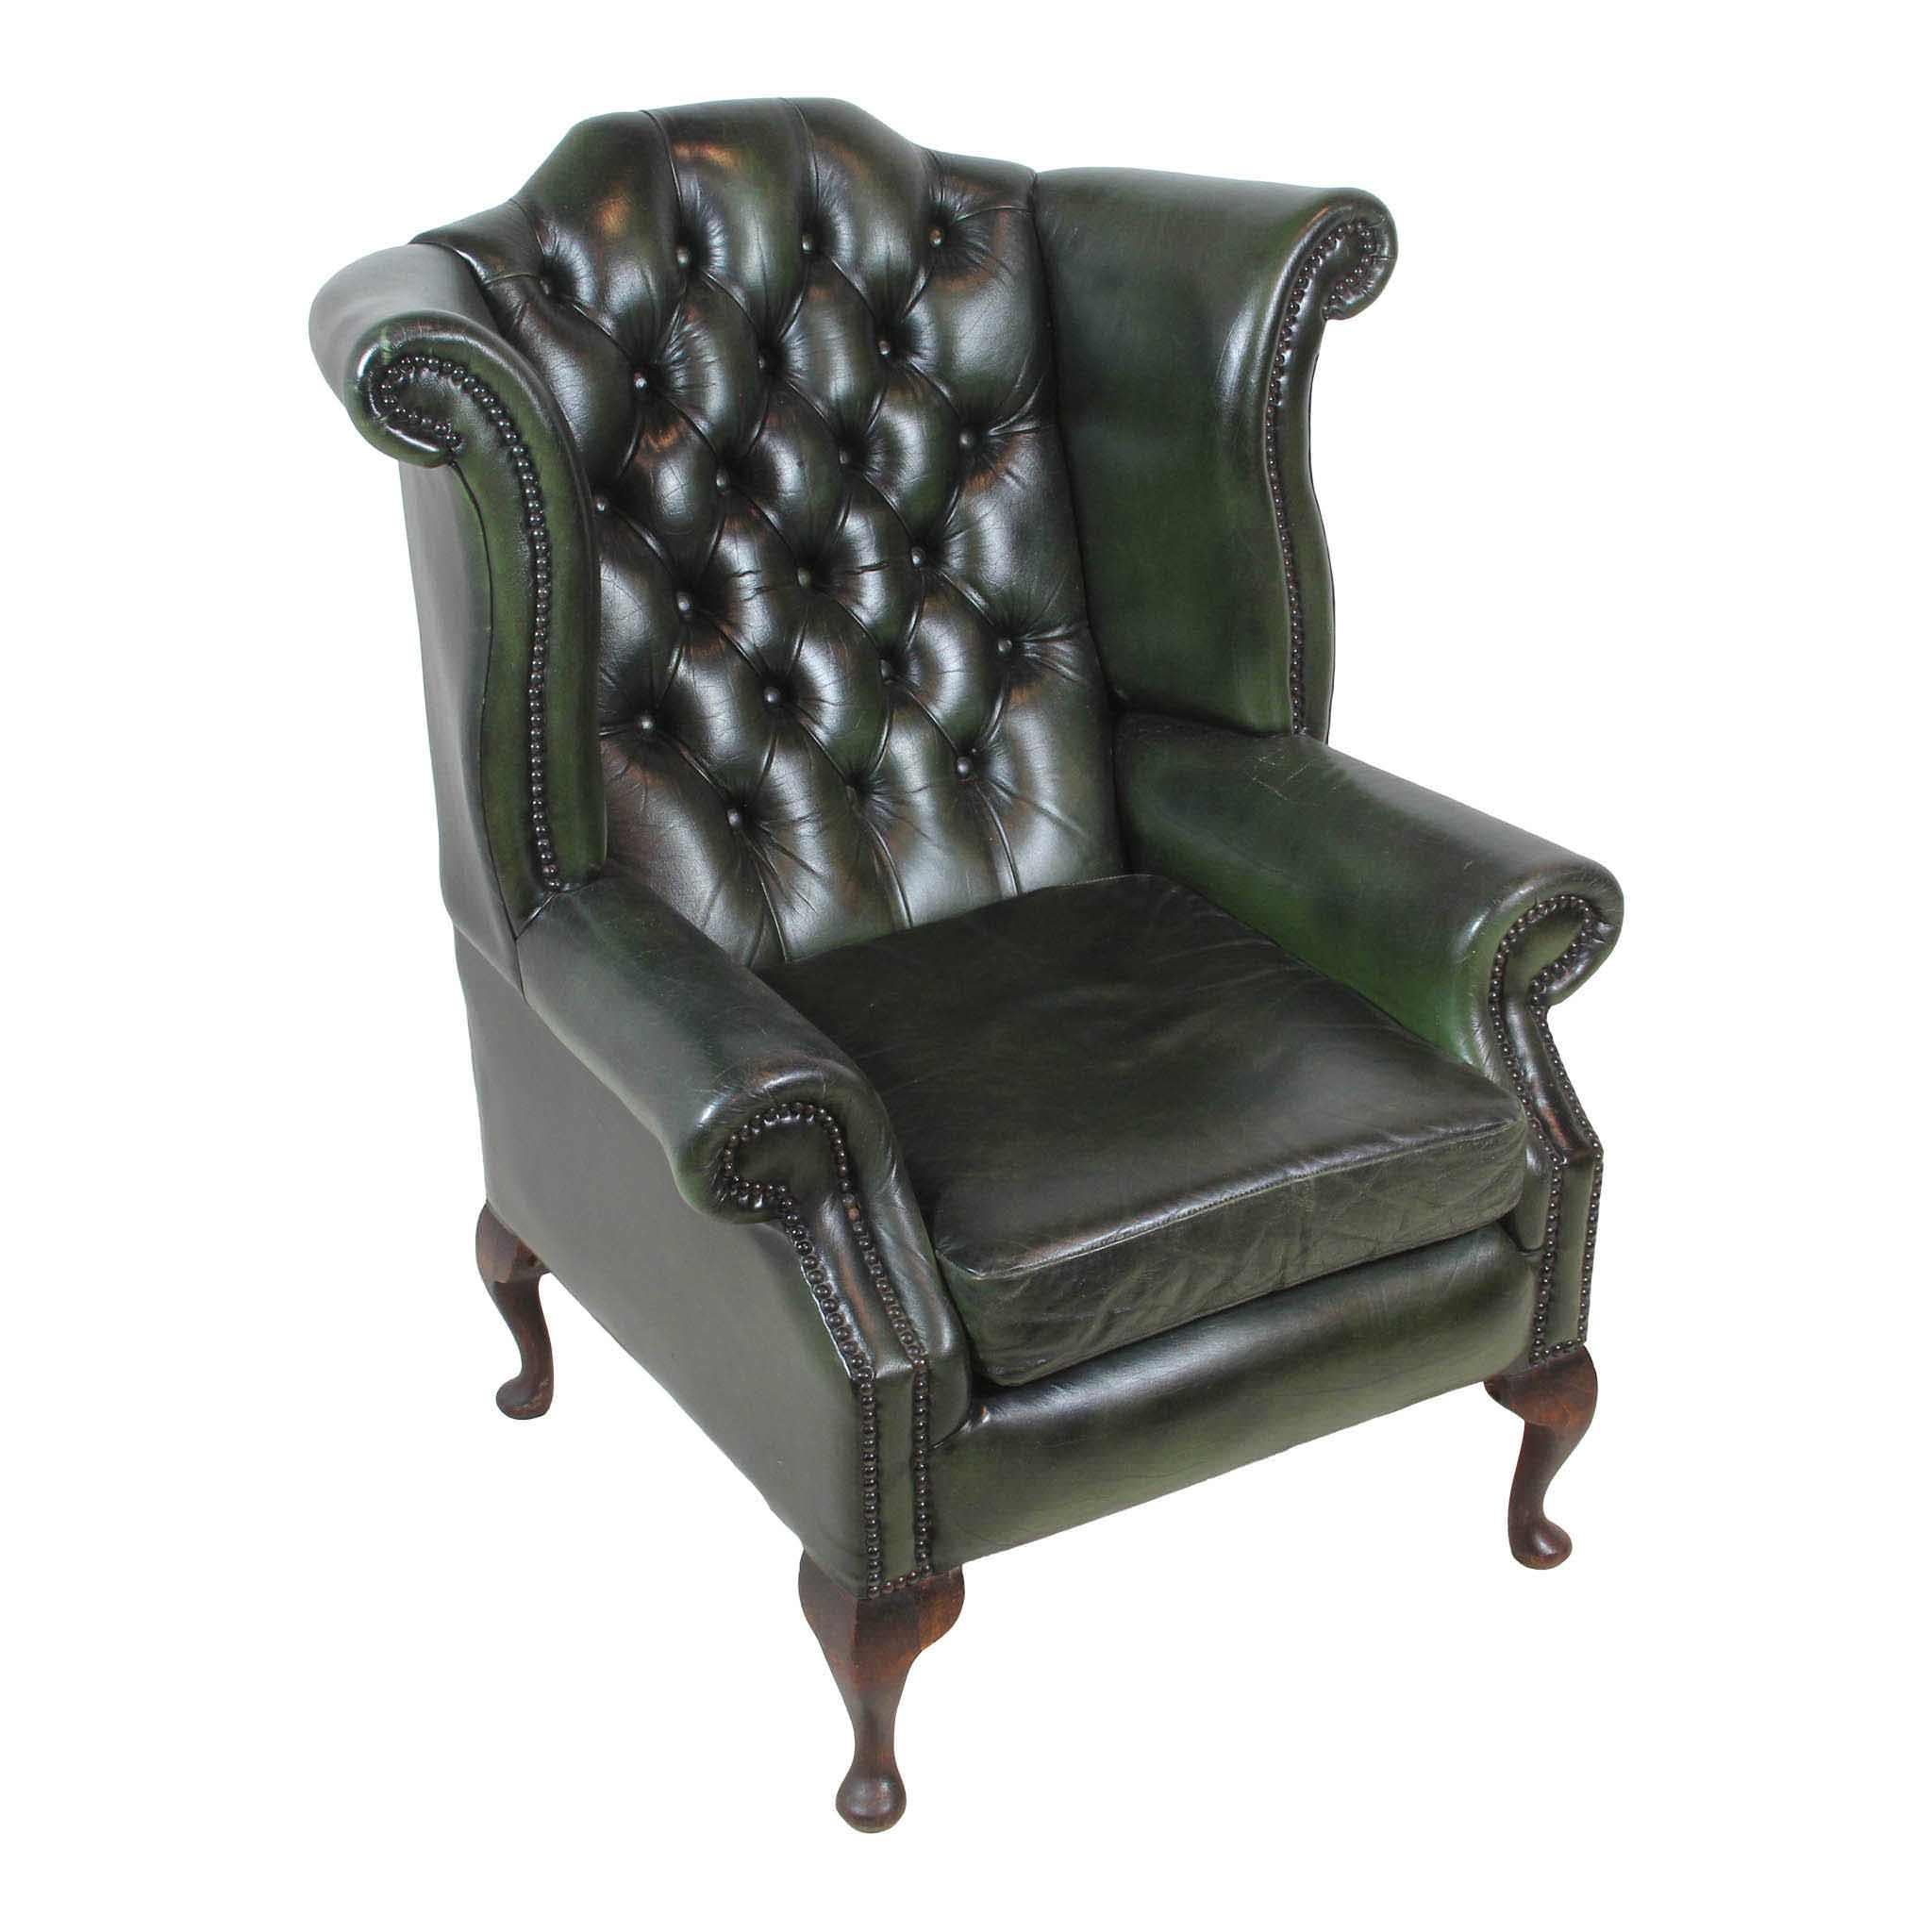 Upholstered in green leather with a tufted back and nail-head trim, this regal wingback chair is both stately and comfortable. It is raised on cabriole legs, which terminate in pad feet.